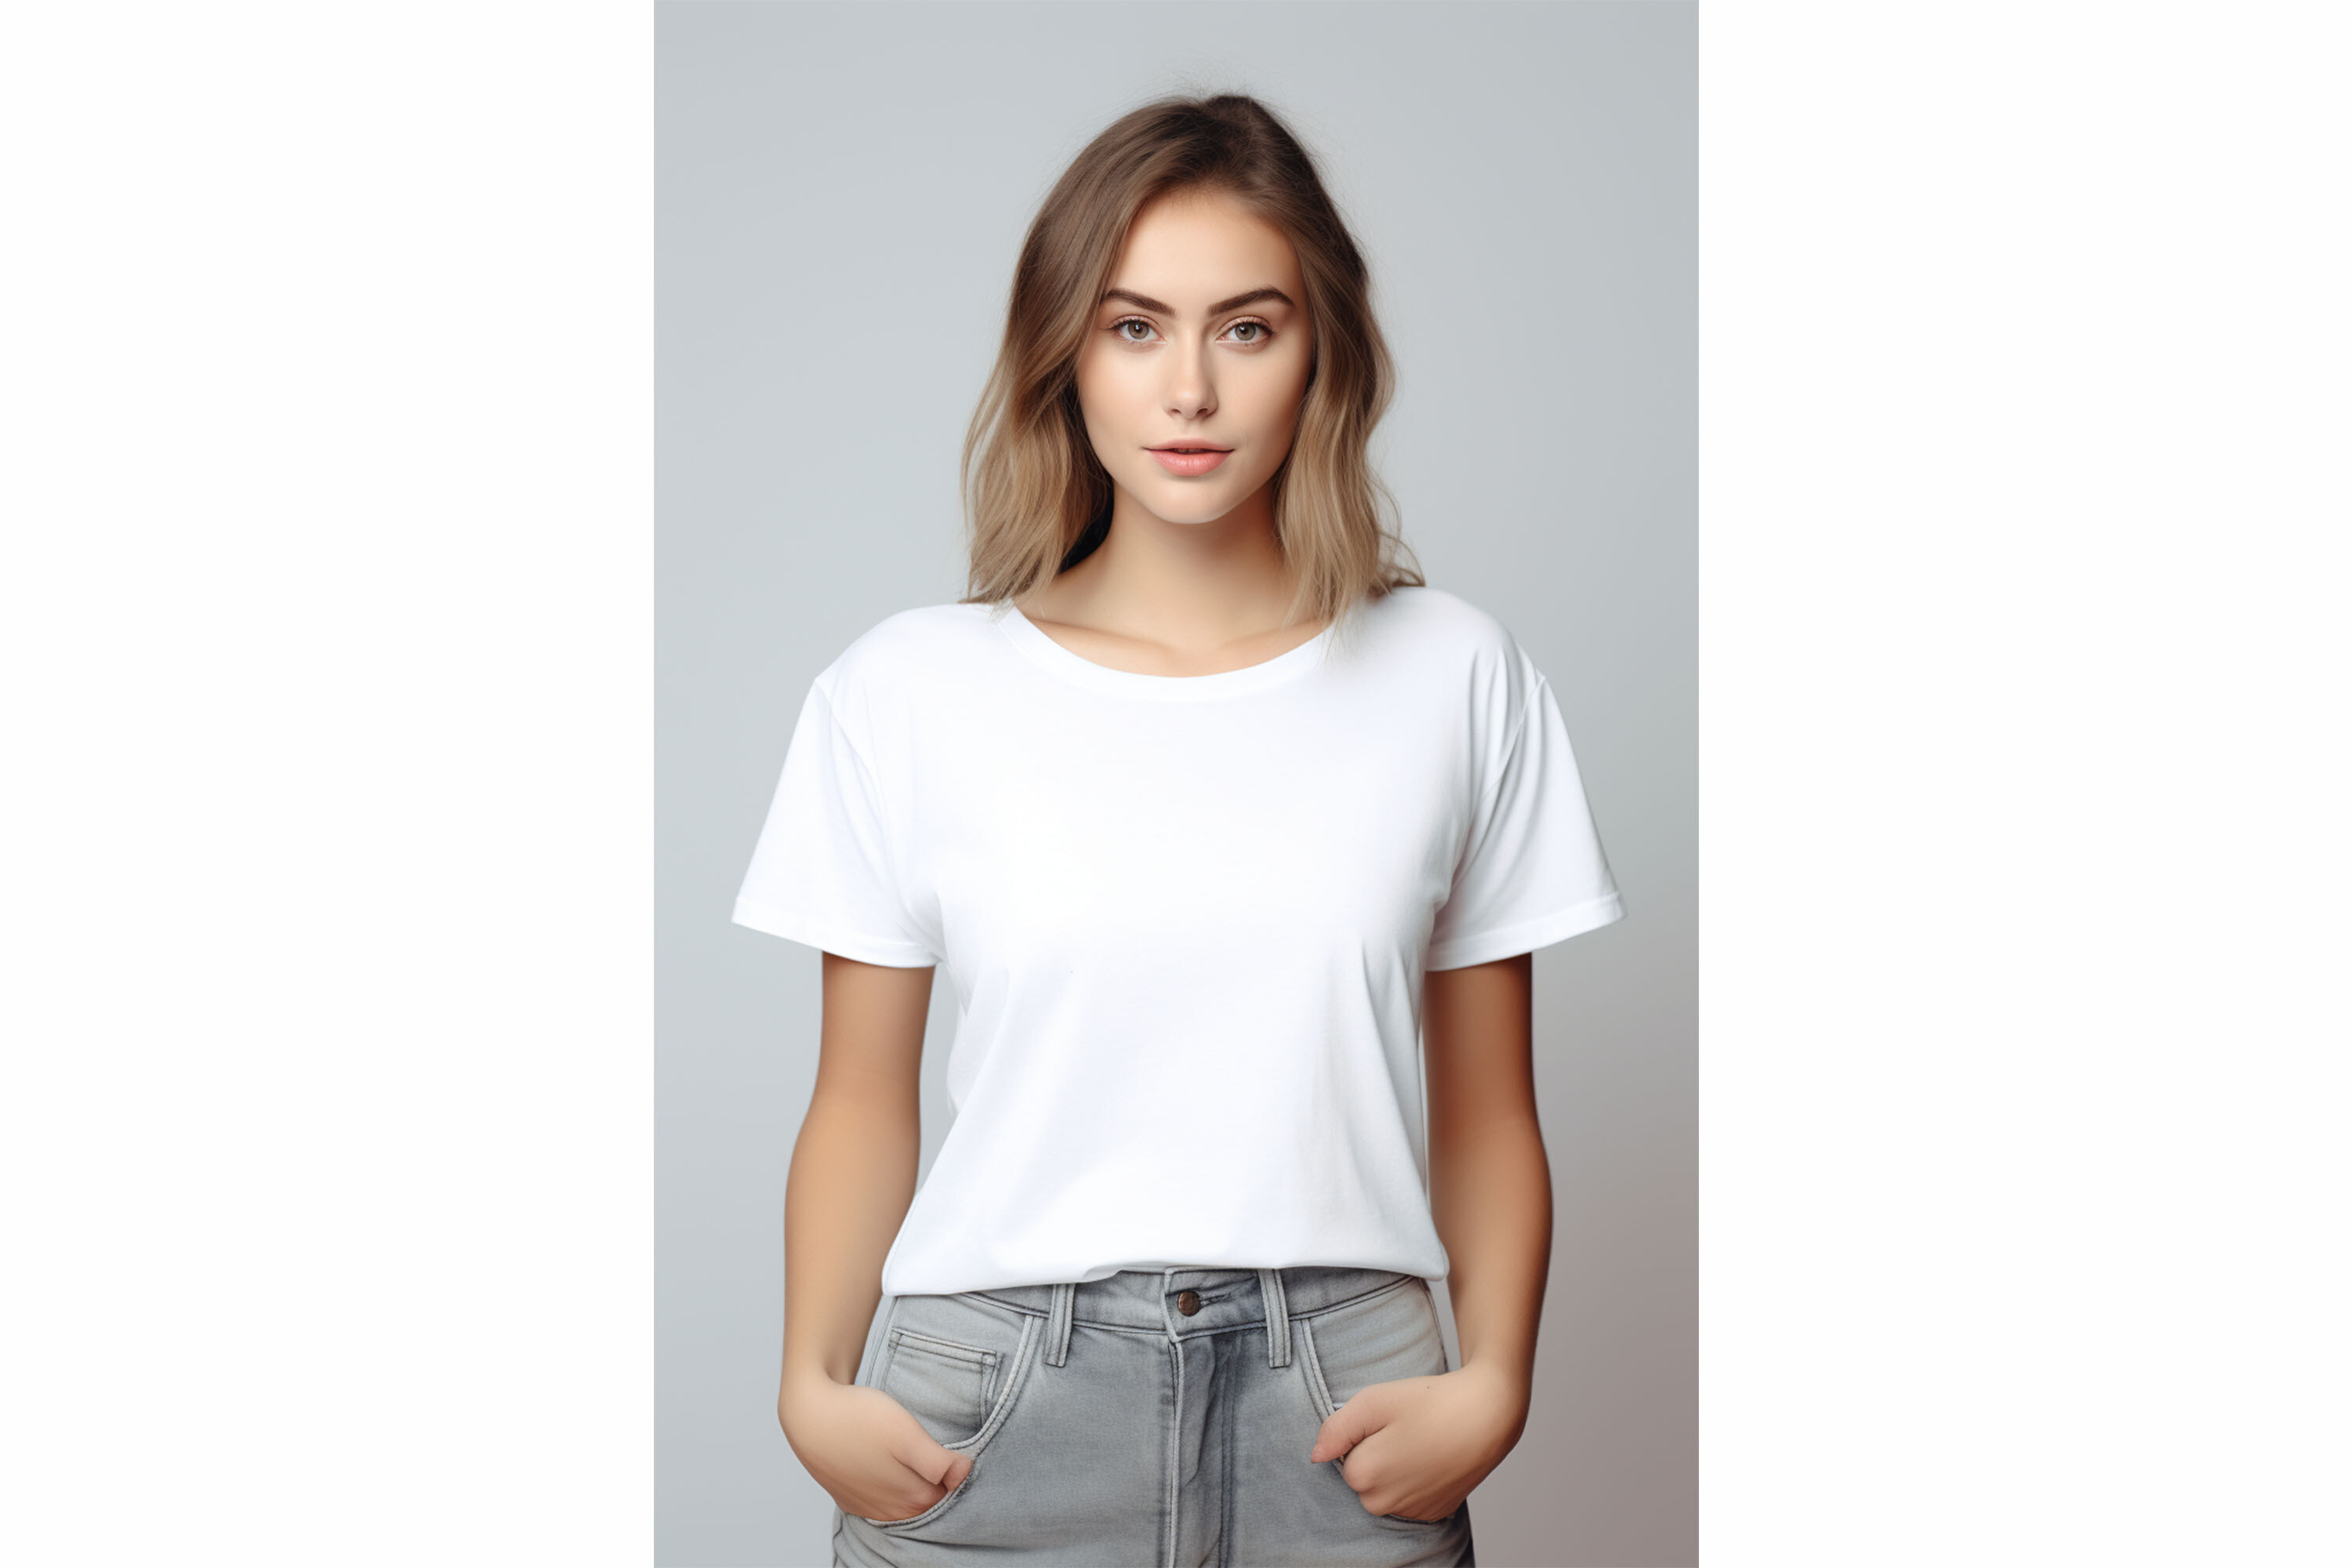 Female Wearing a White T-Shirt Mockup Graphic by Illustrately ...